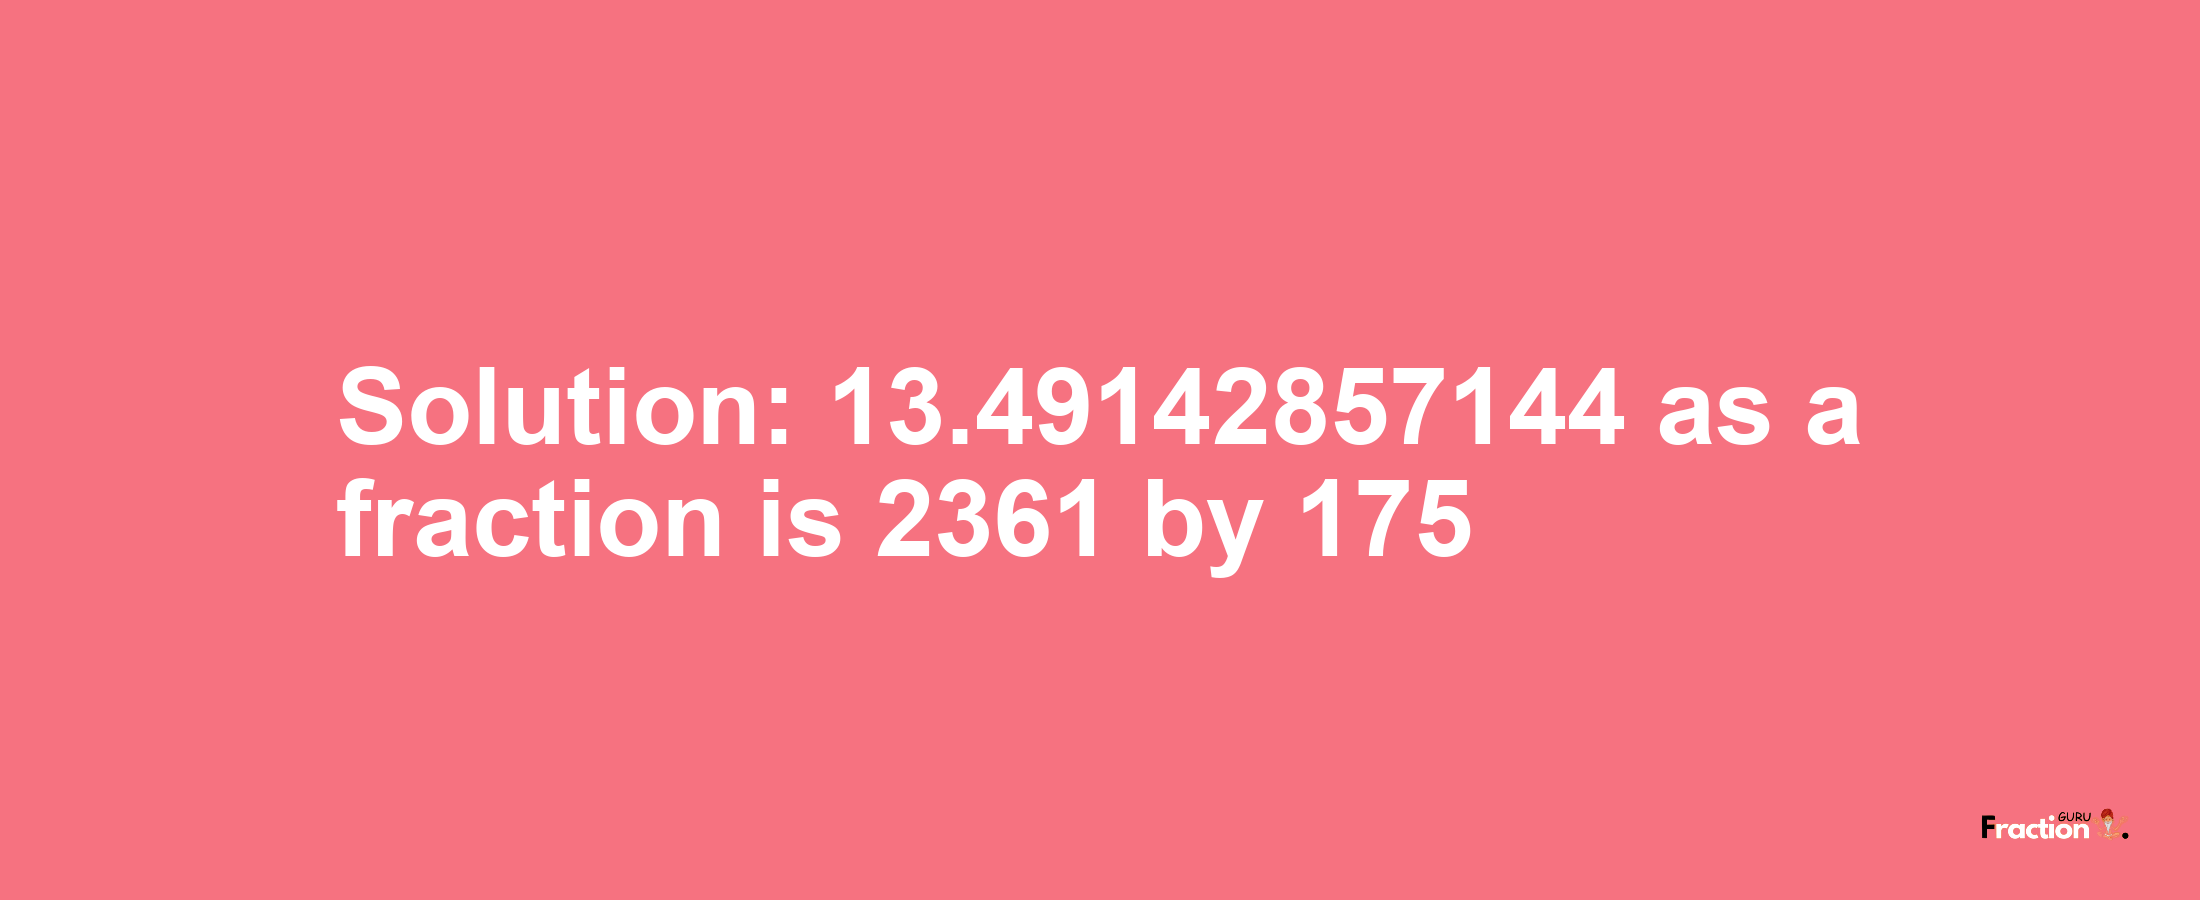 Solution:13.49142857144 as a fraction is 2361/175